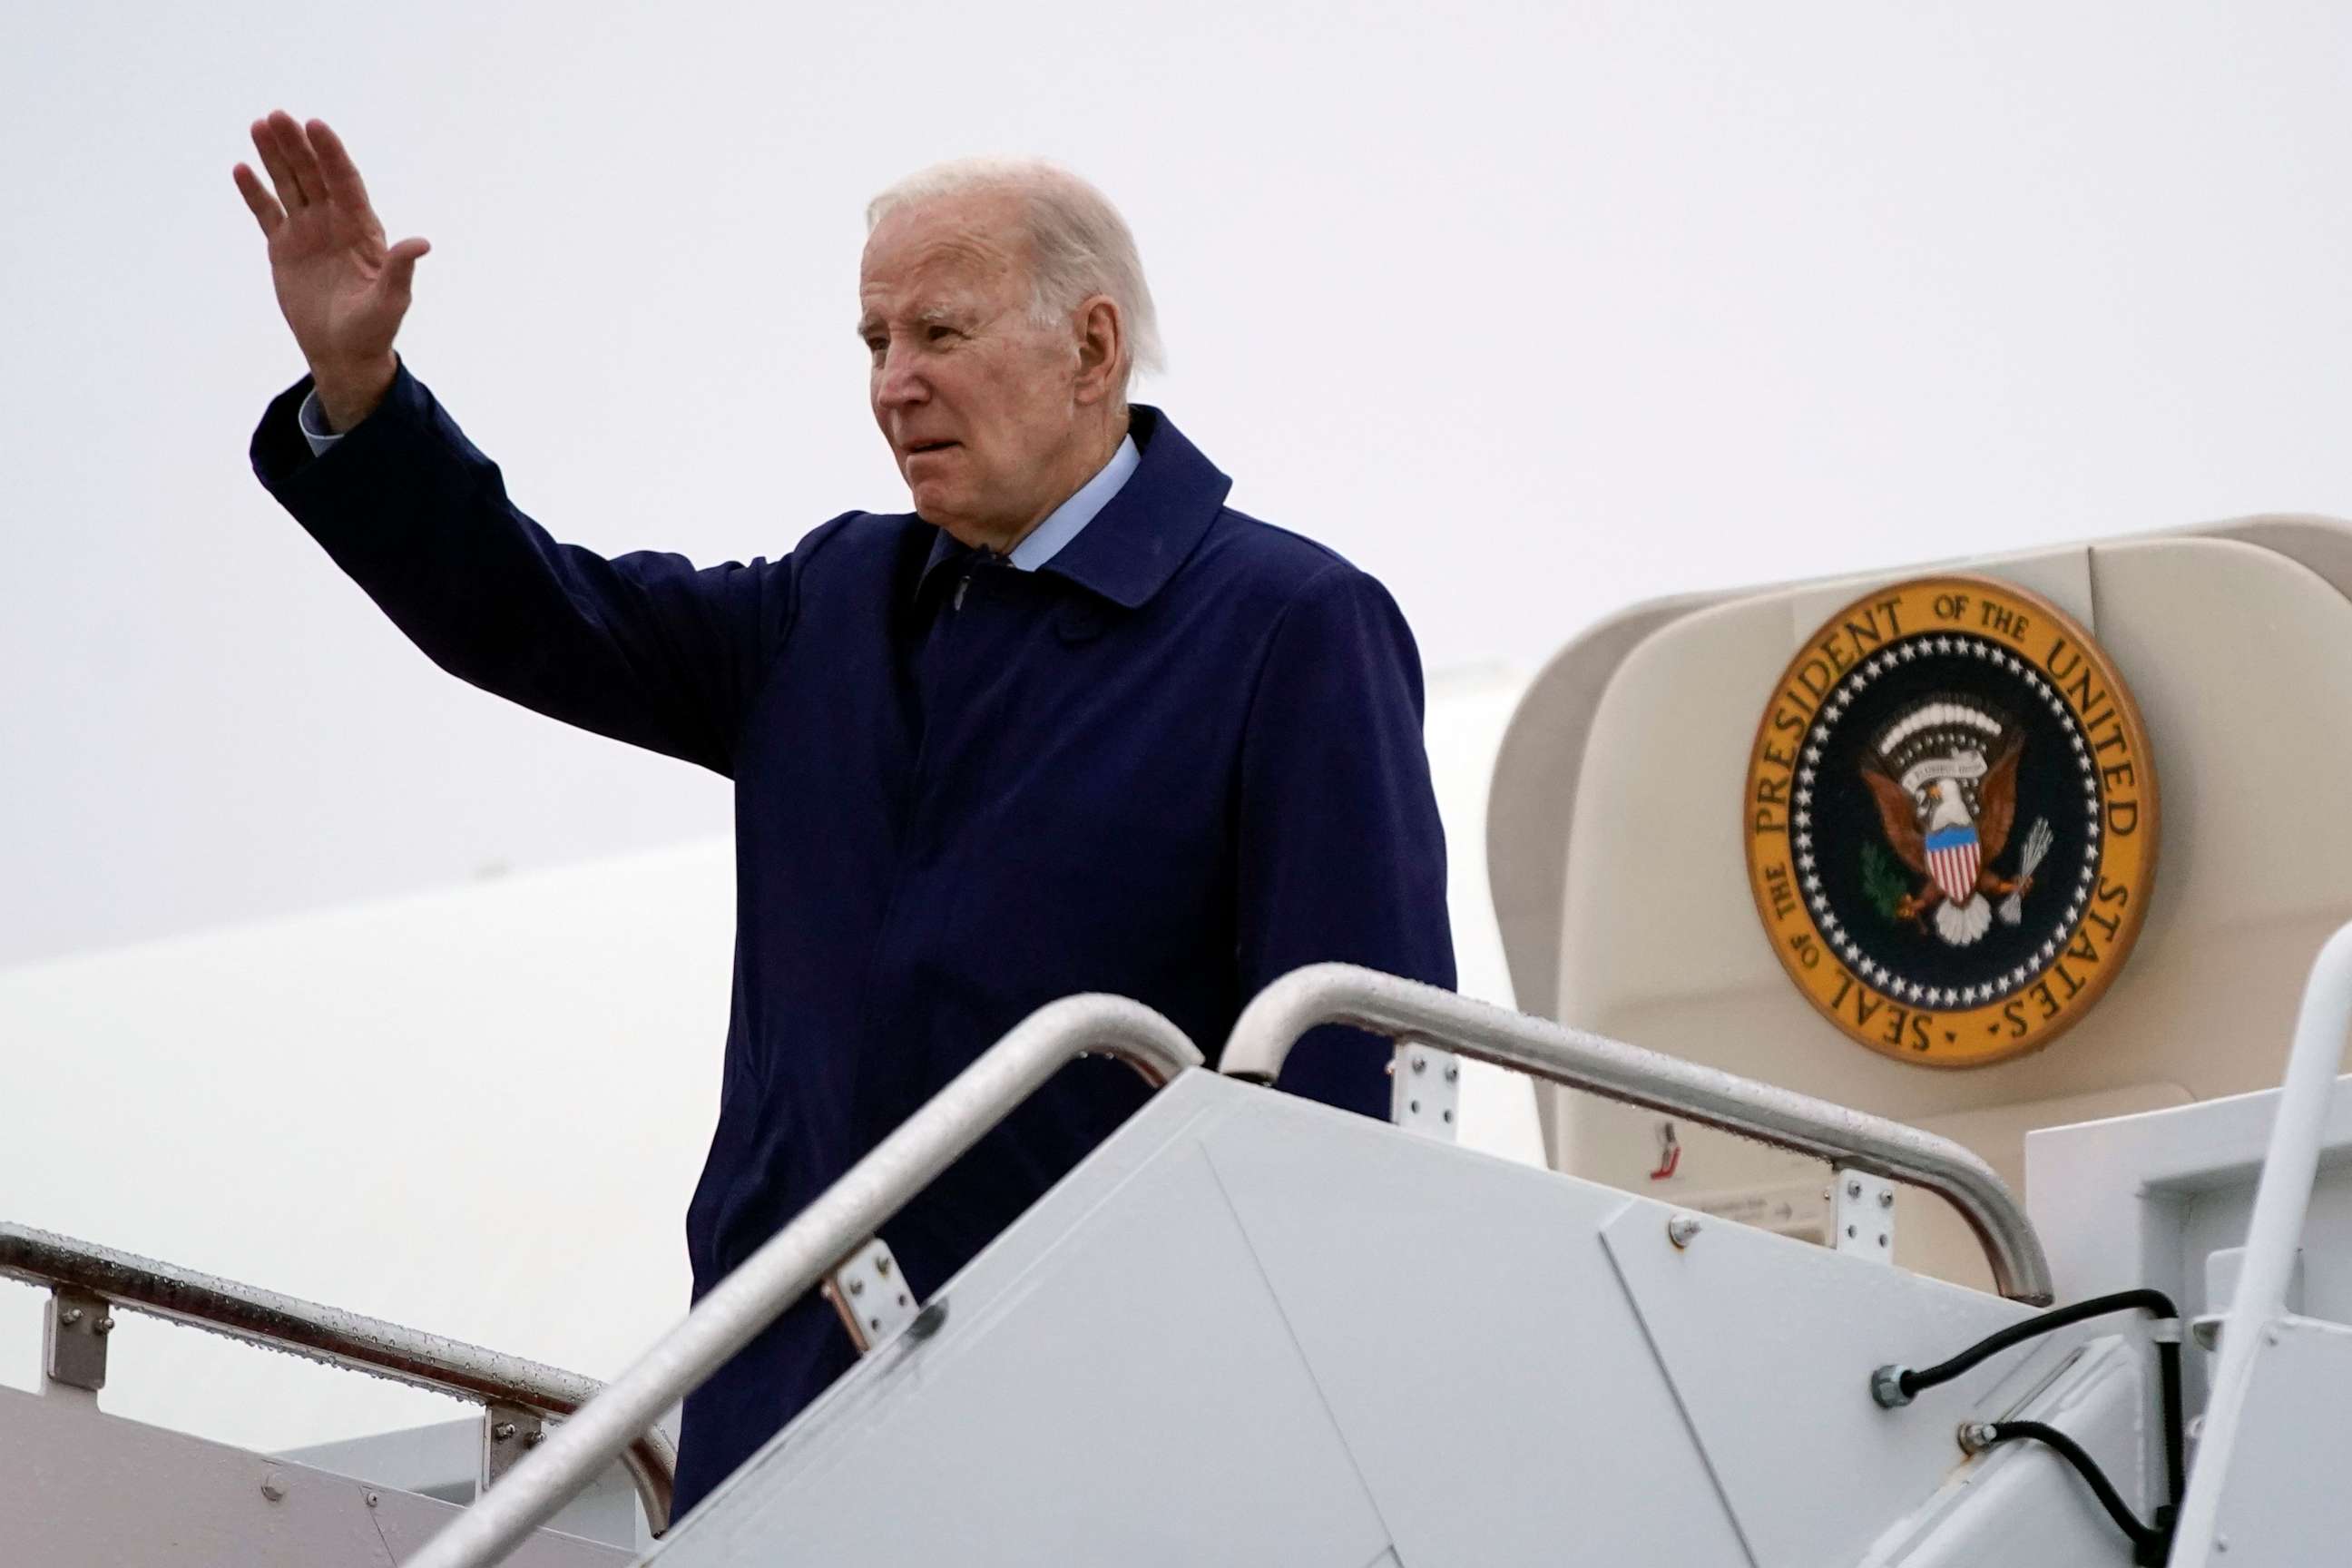 PHOTO: President Joe Biden waves as he boards Air Force One, Friday, March 10, 2023, at Andrews Air Force Base, Maryland.